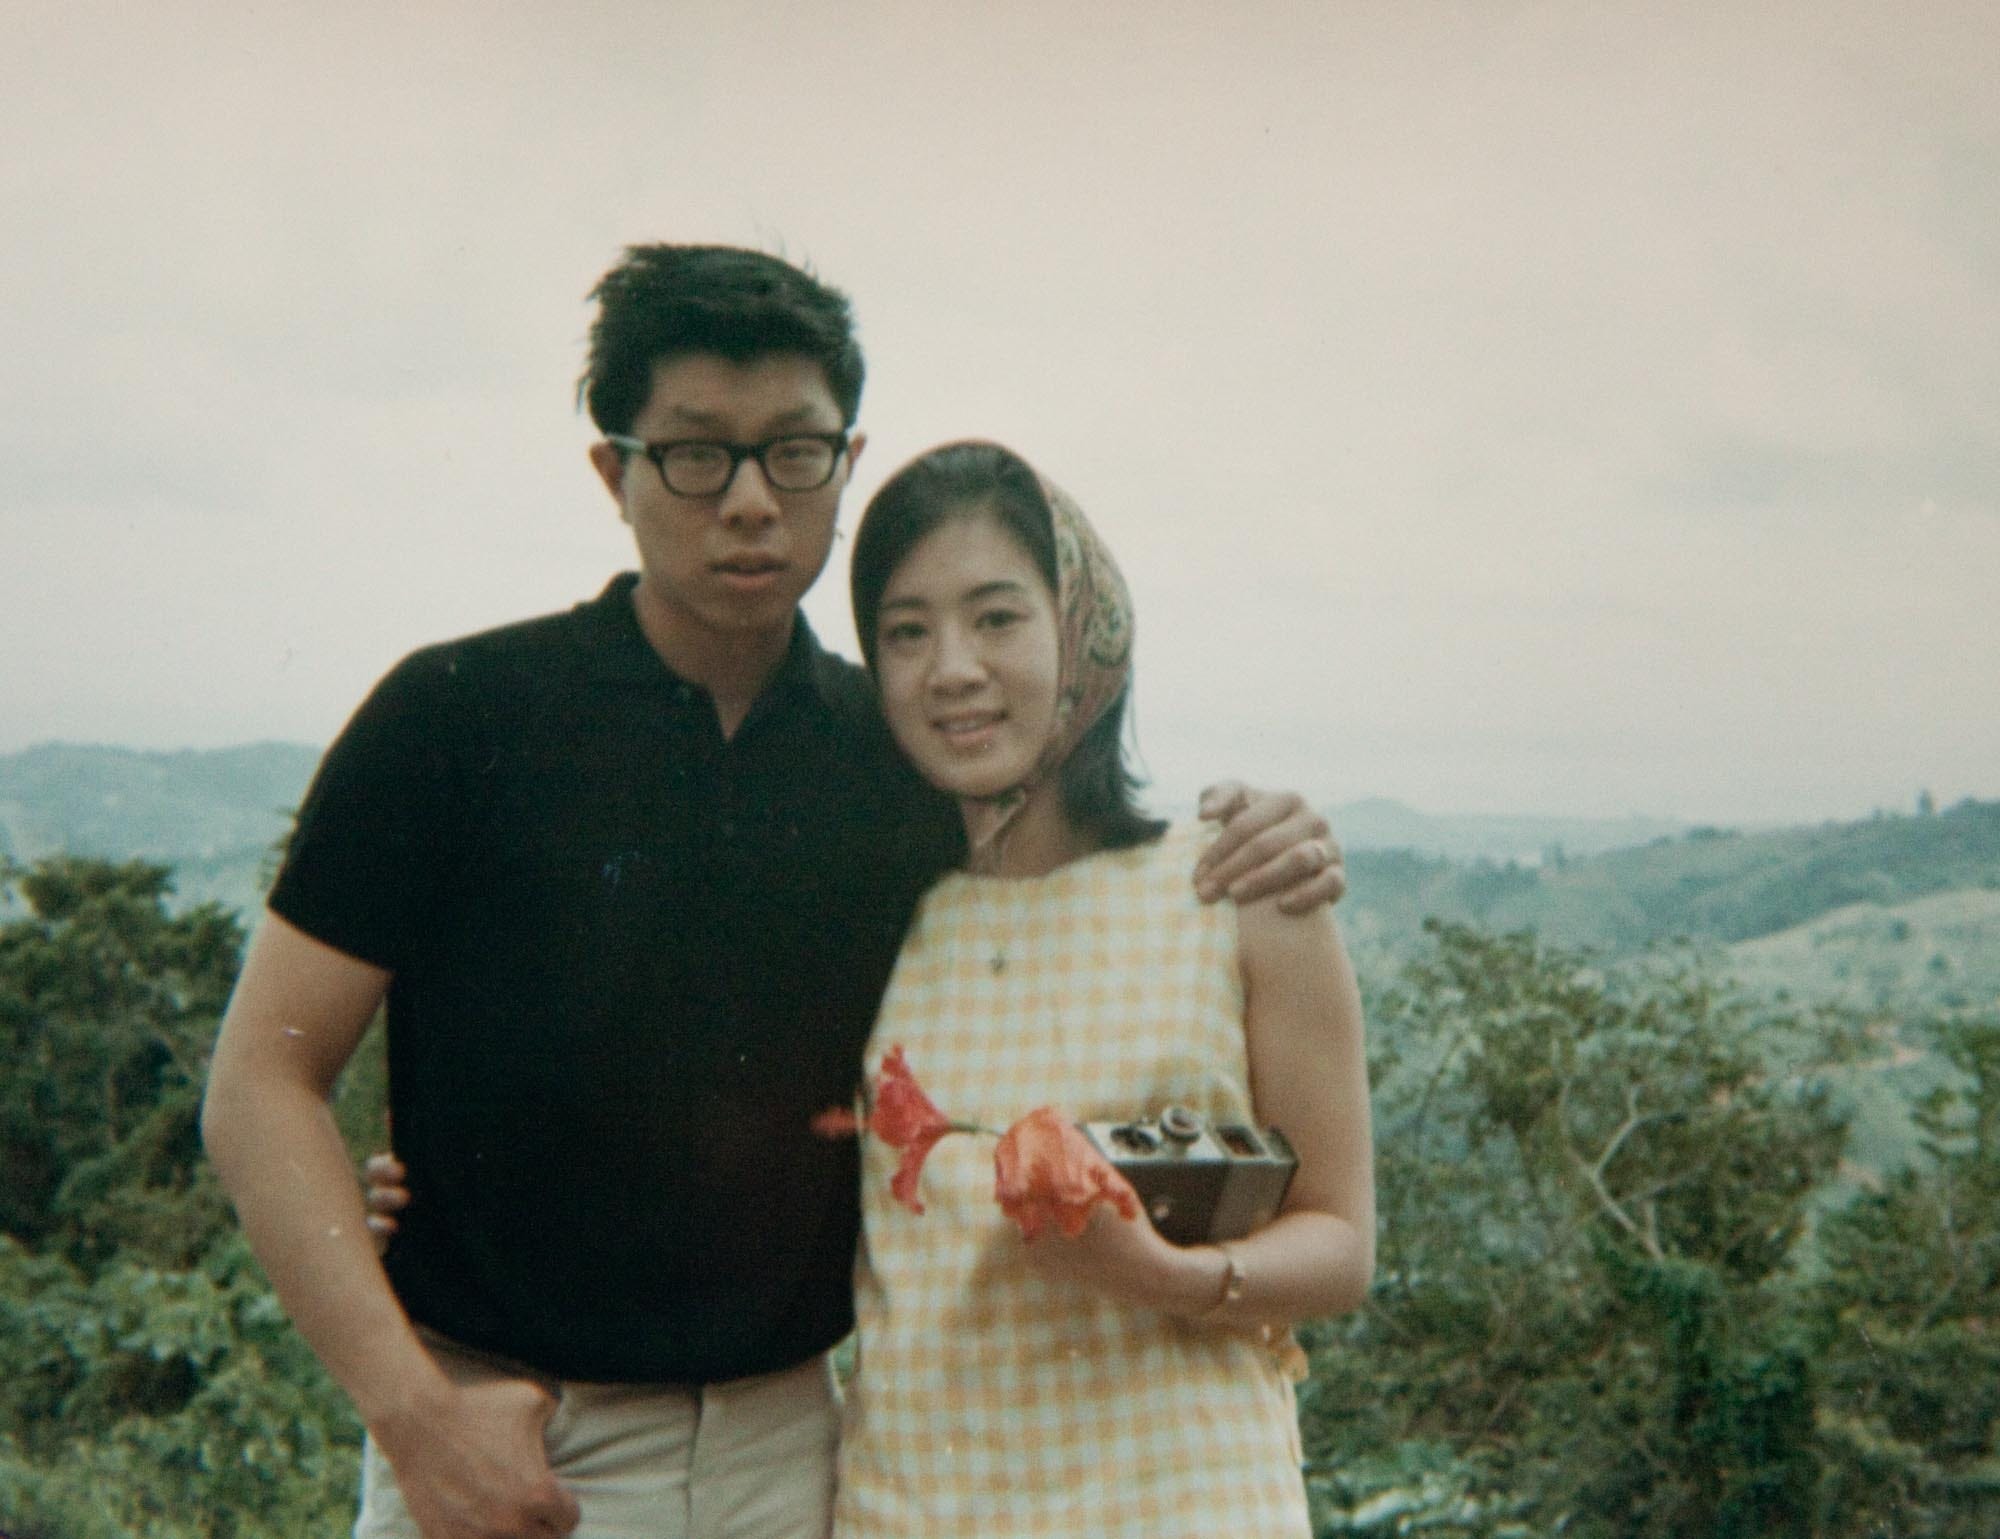 The author's parents on their honeymoon in Puerto Rico, 1966